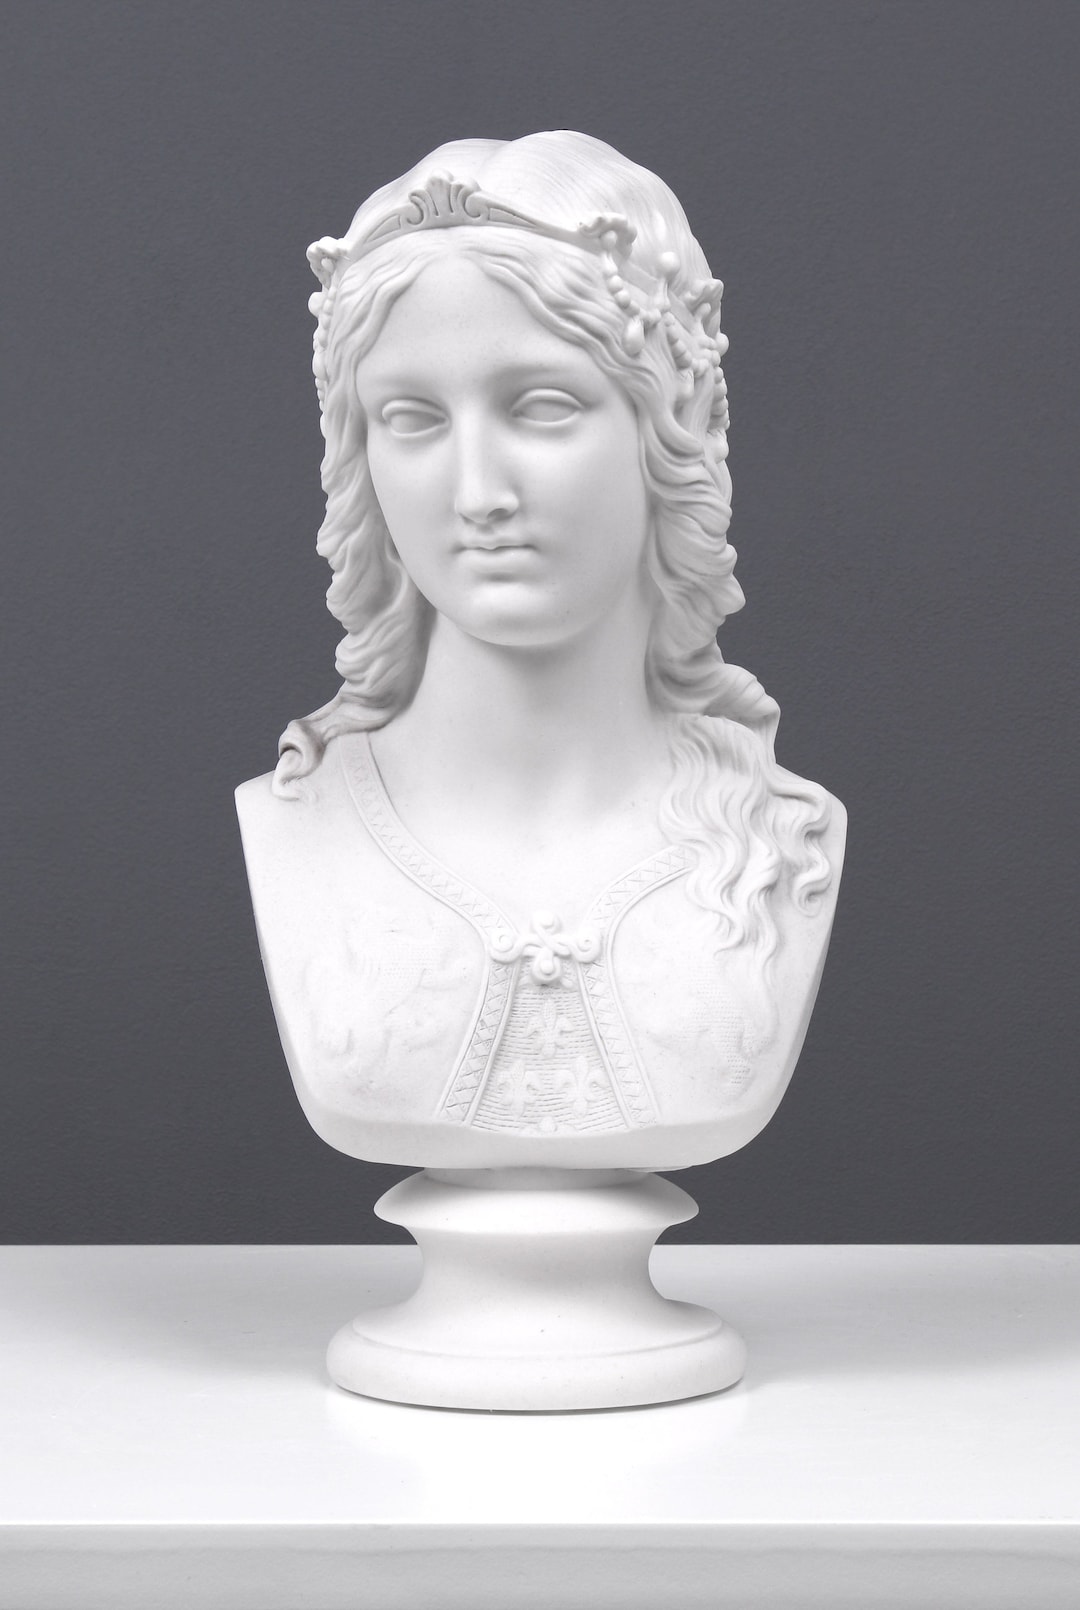 Veiled Lady Bust Sculpture Female Antique Art Statue in Marble Stone  Perfect Mom Gift White Home Decor Handmade the Ancient Home 